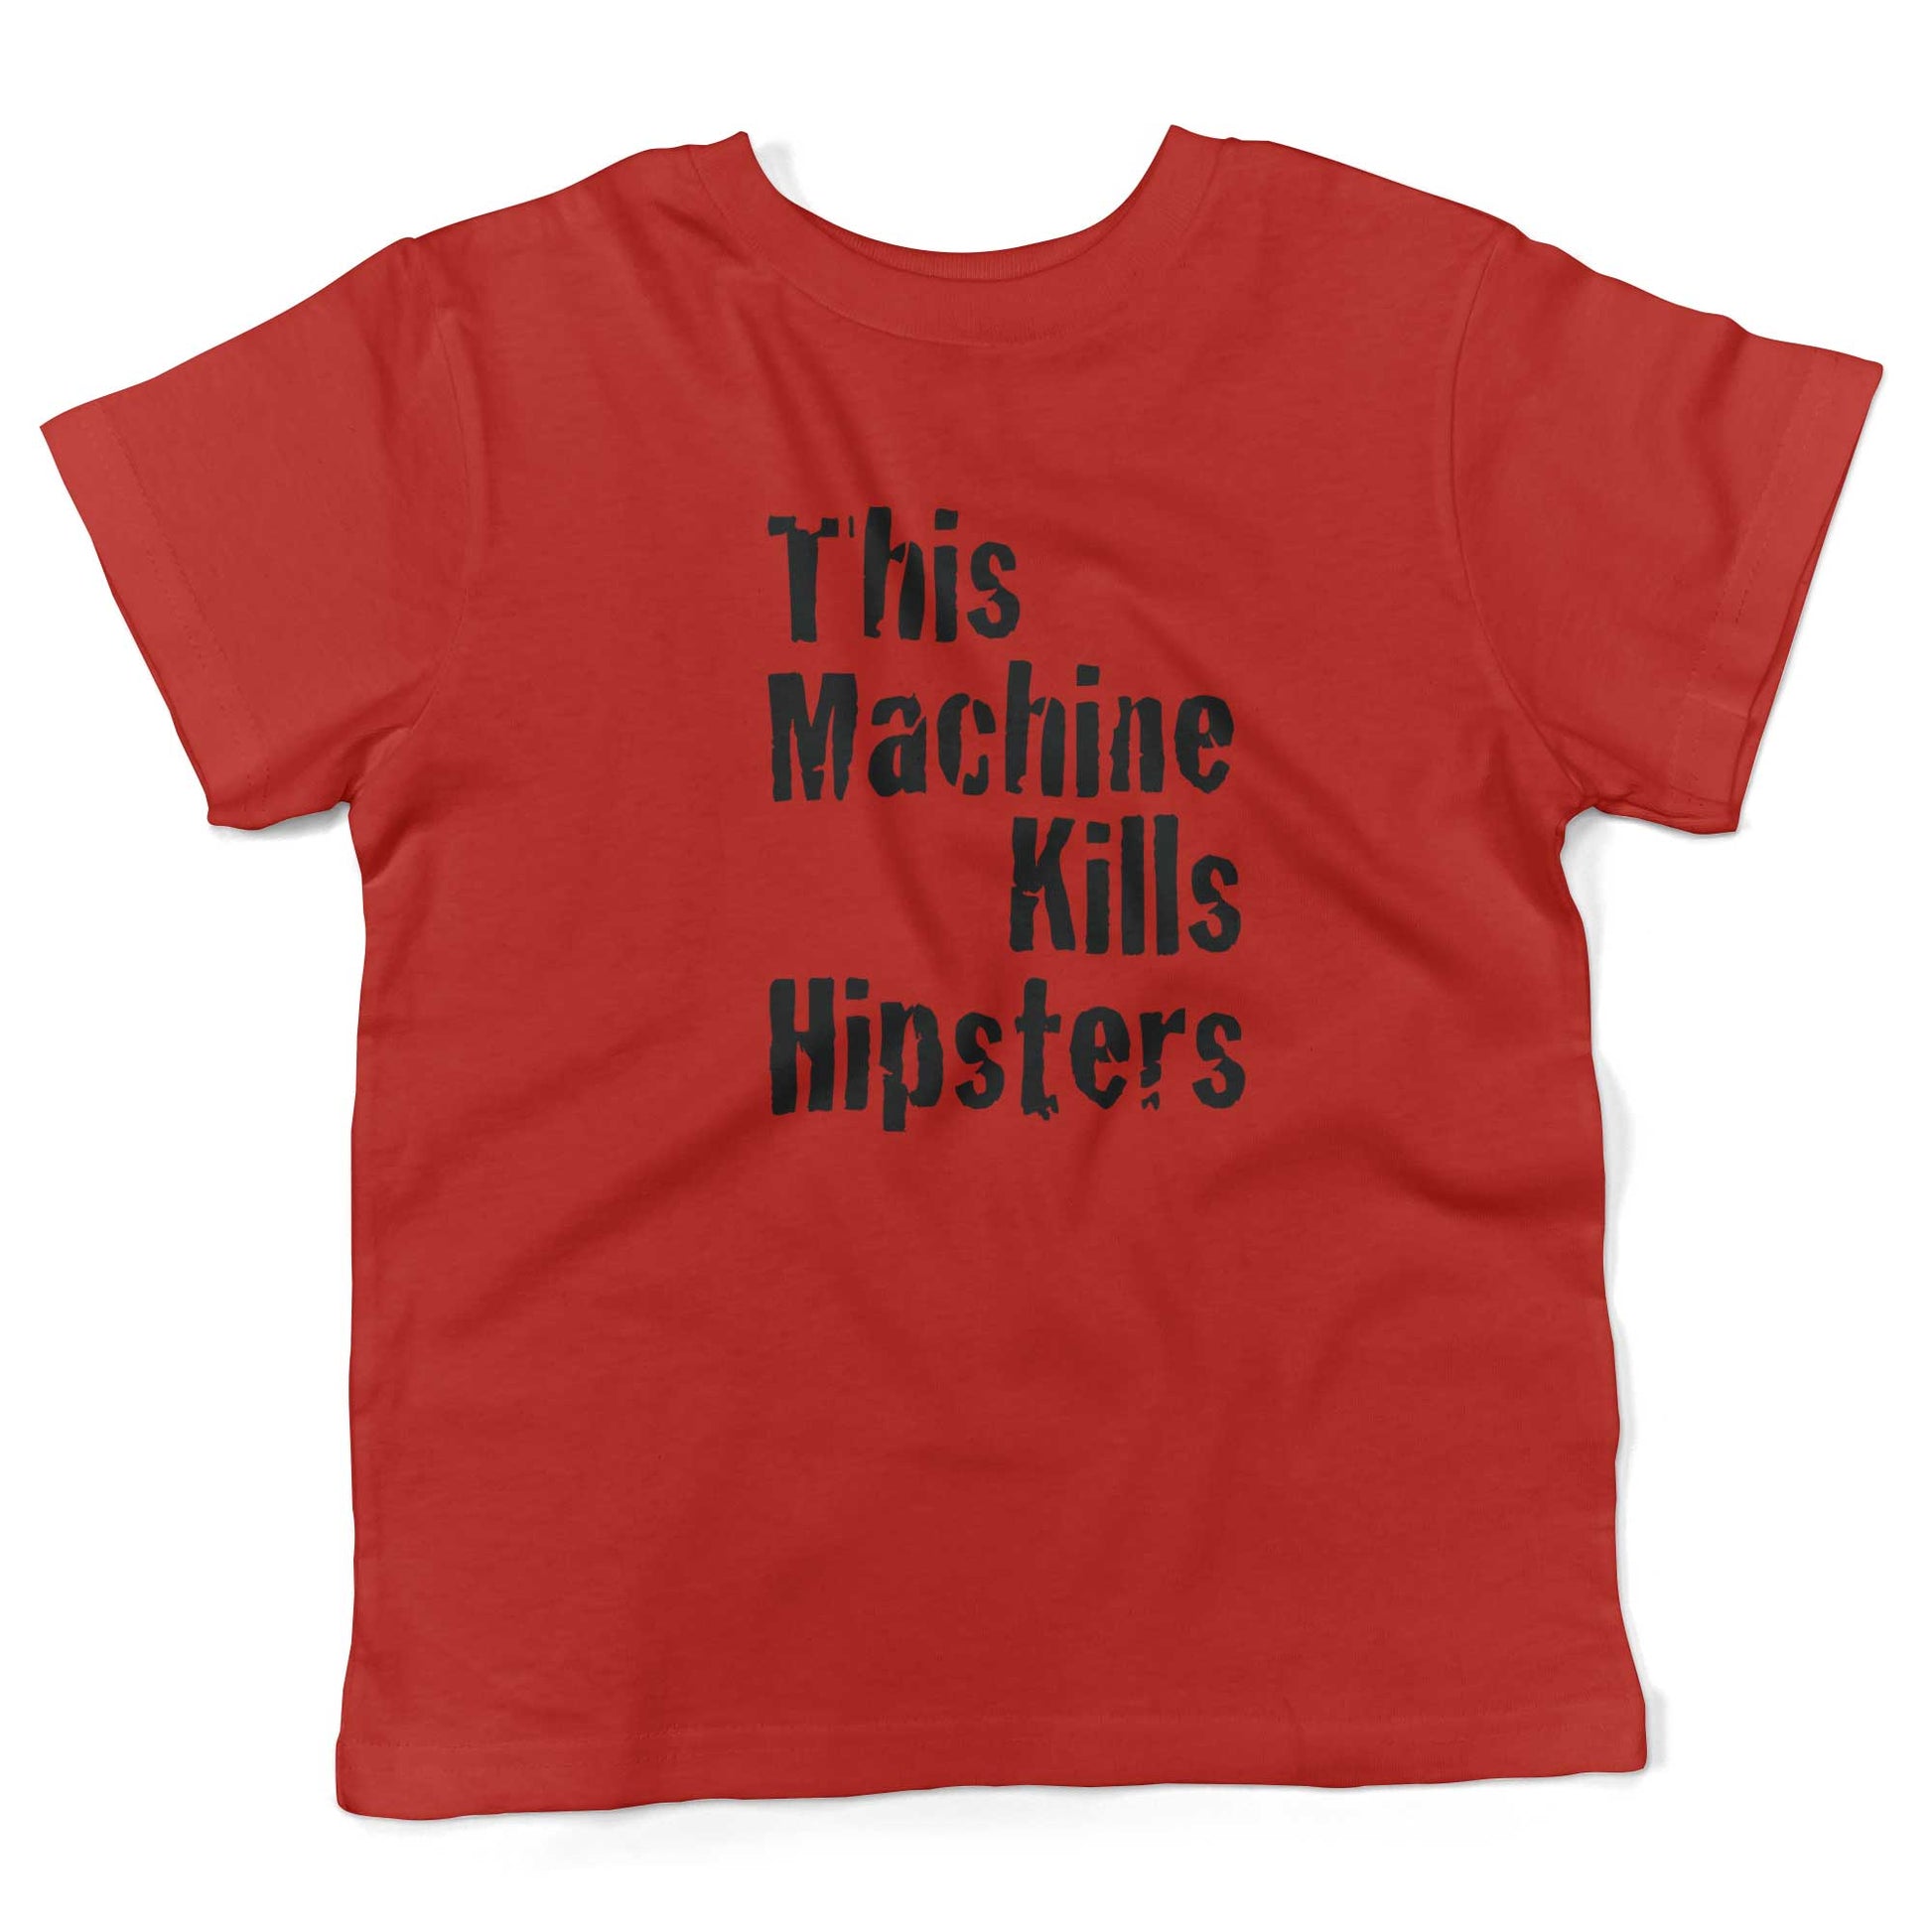 This Machine Kills Hipsters Toddler Shirt-Red-2T